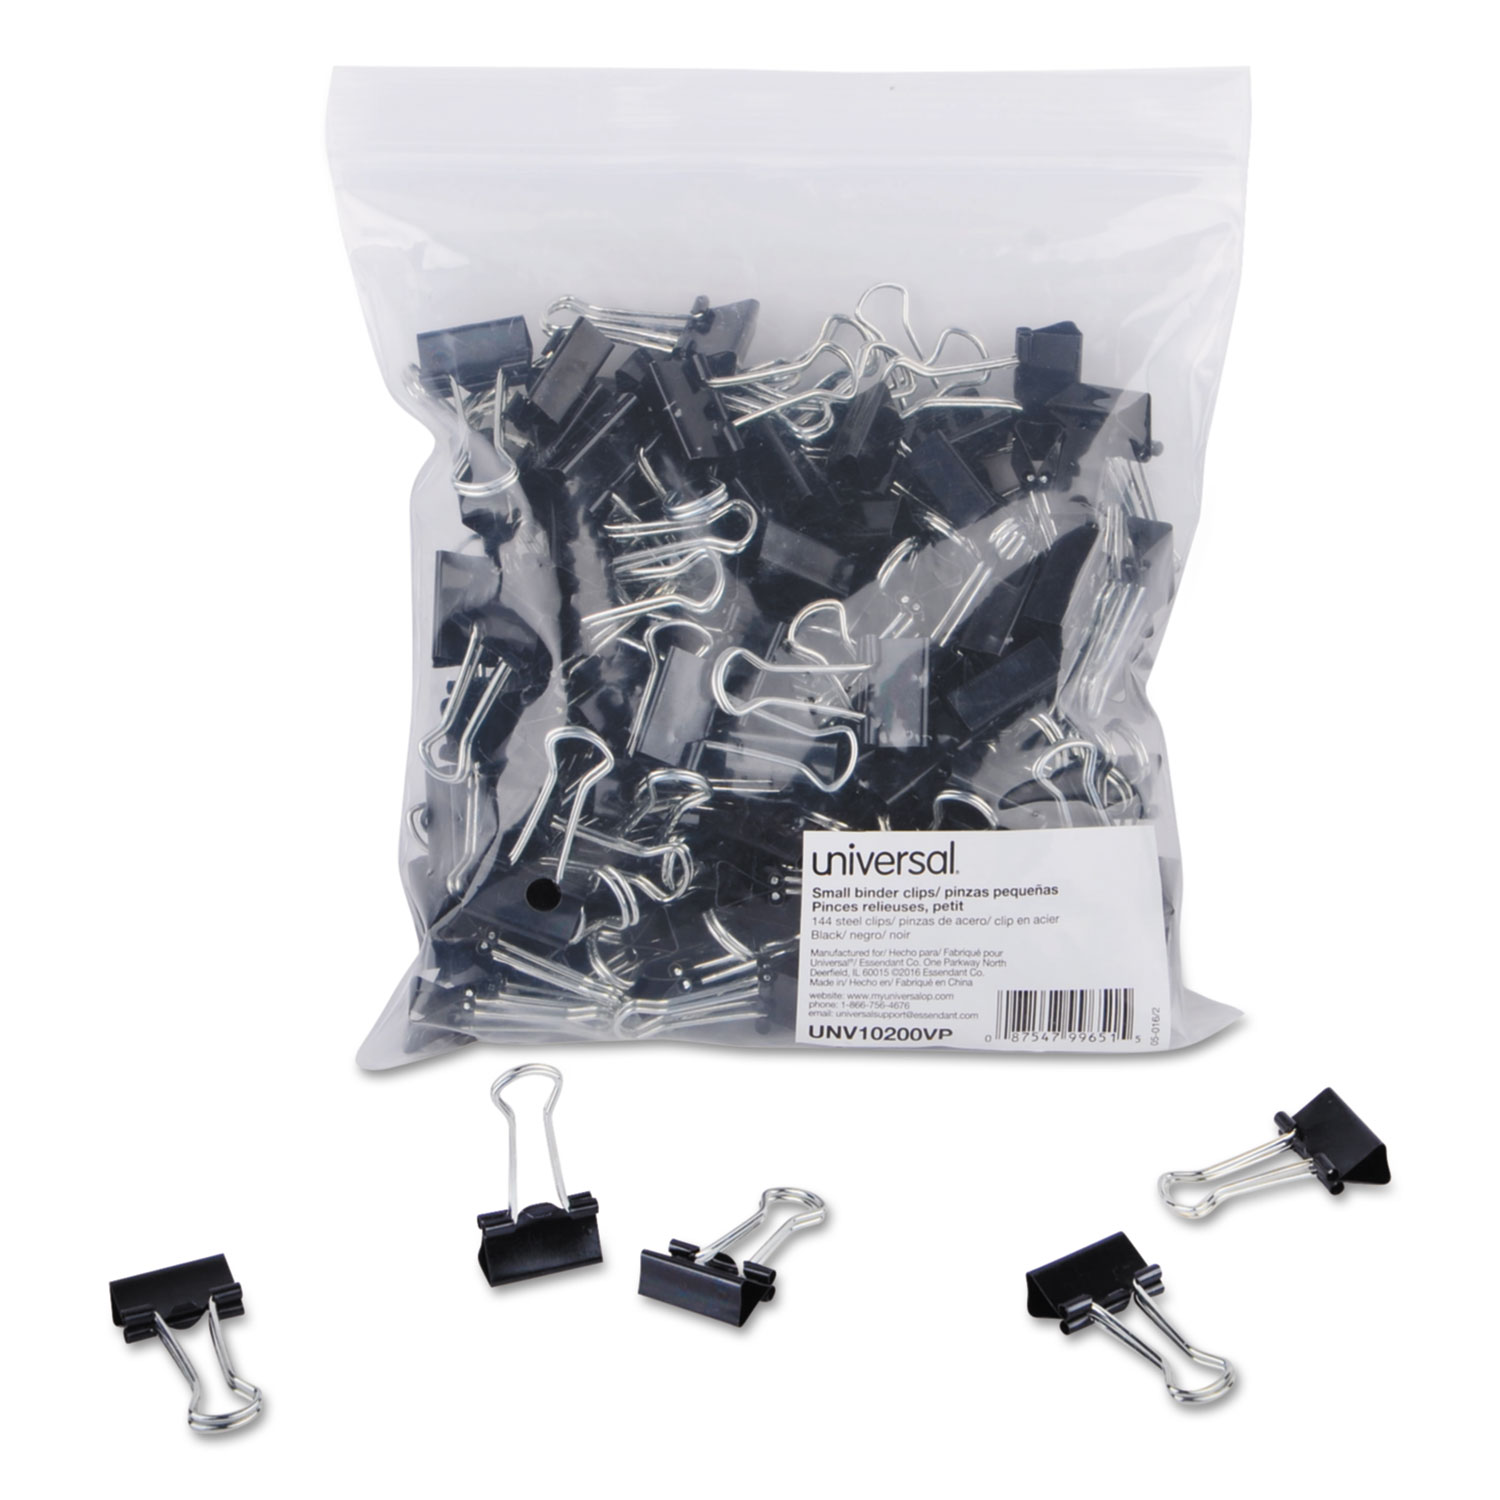  Universal UNV10200VP Binder Clips in Zip-Seal Bag, Small, Black/Silver, 144/Pack (UNV10200VP) 